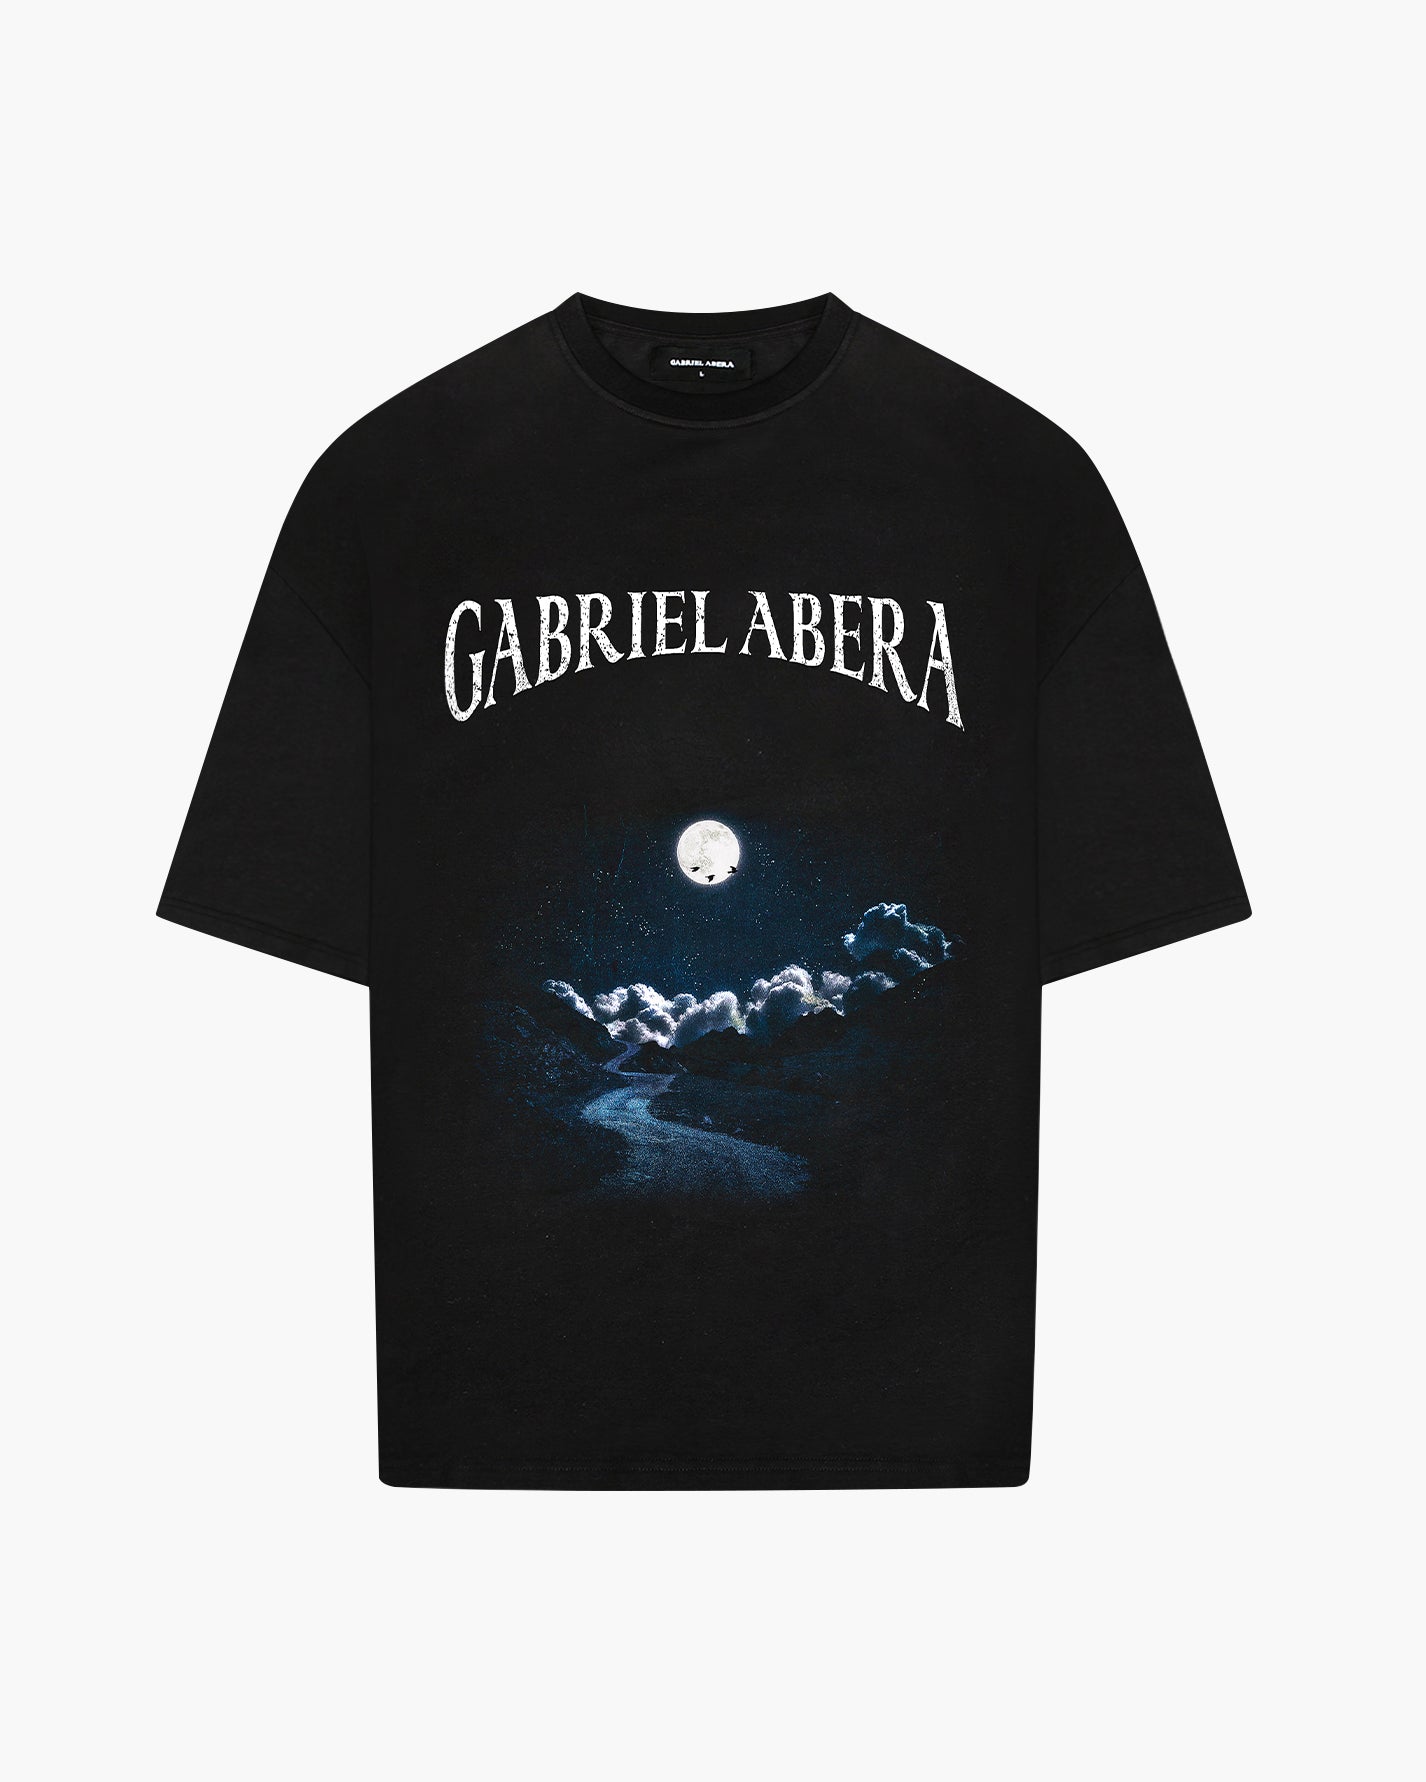 Black oversize tshirt with blue moon design in the front 